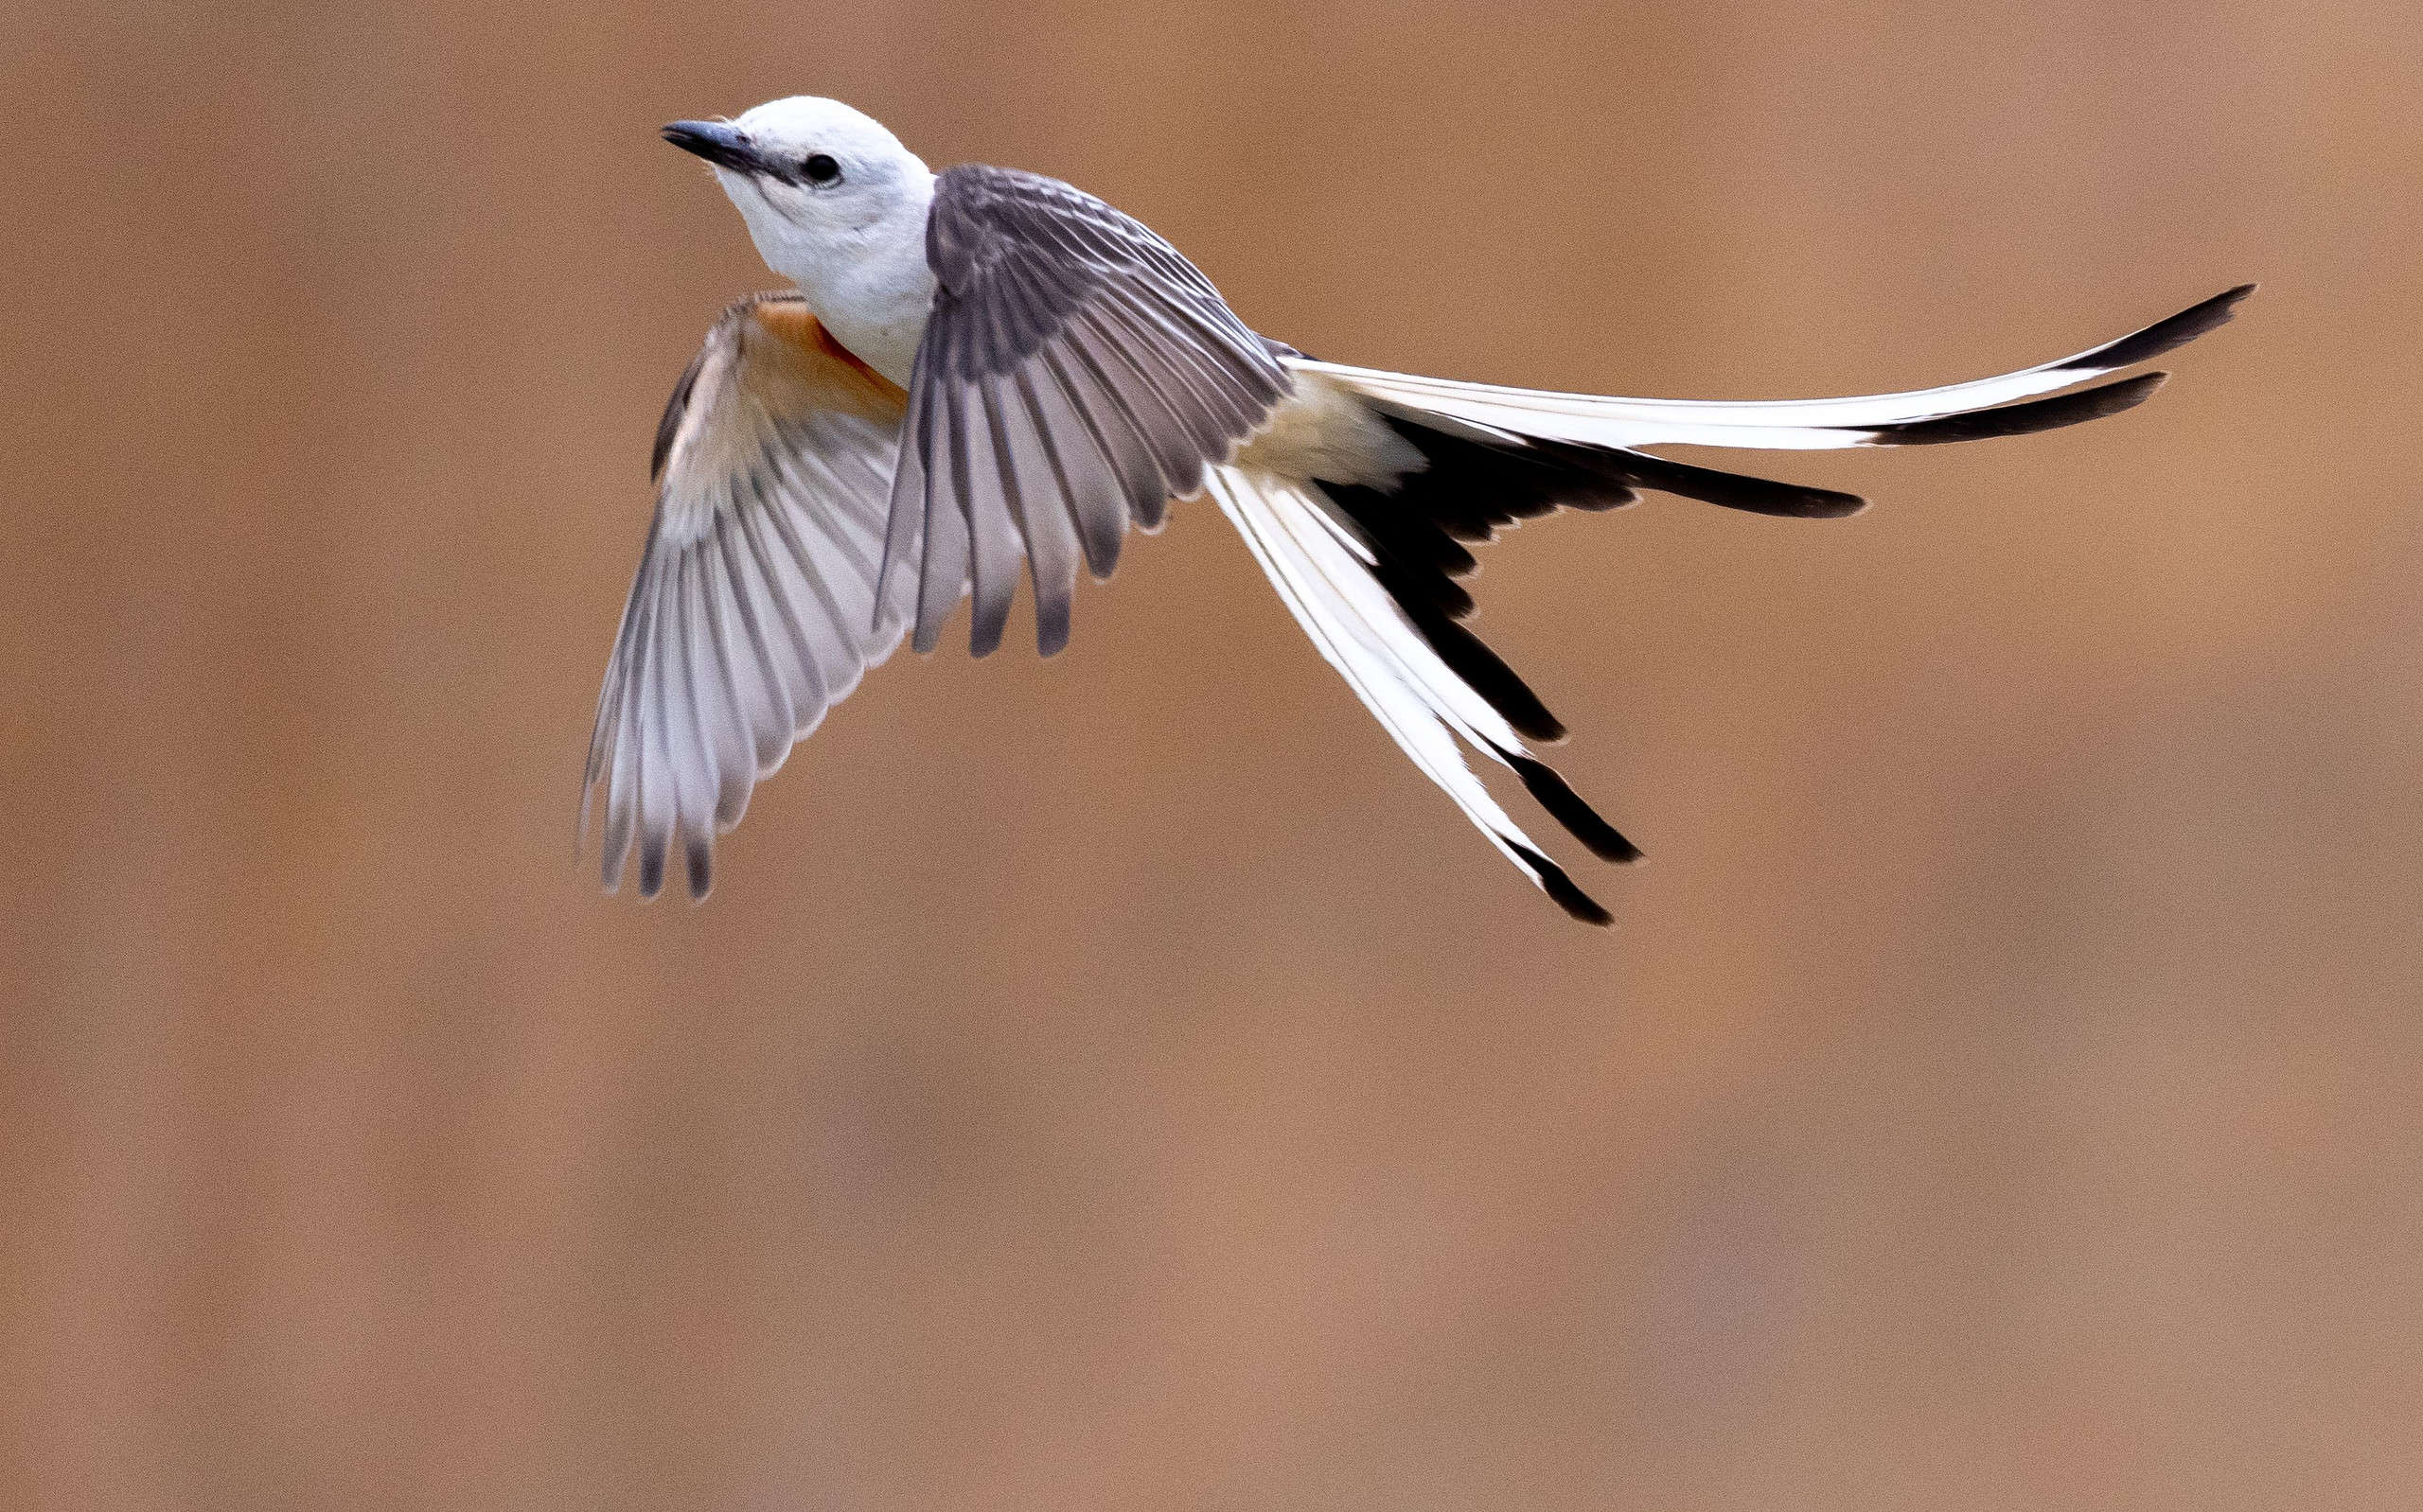 Closeup of the scissor-tailed flycatcher, Tyrannus forficatus flying against a blurry background.